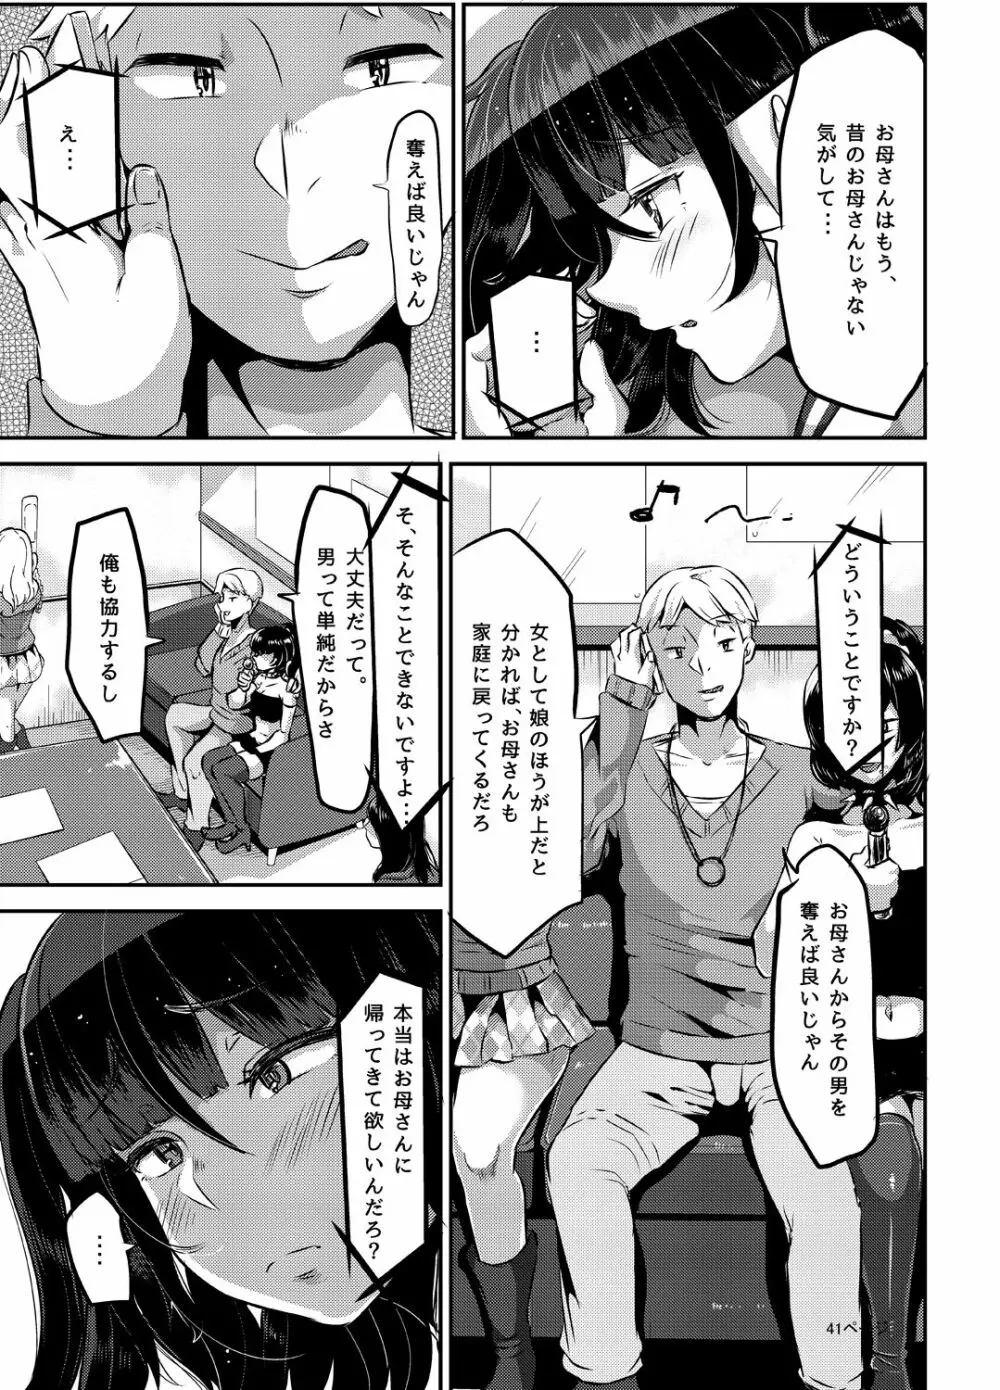 好き好き好き好き好き好き好き好き ver.3 Page.42